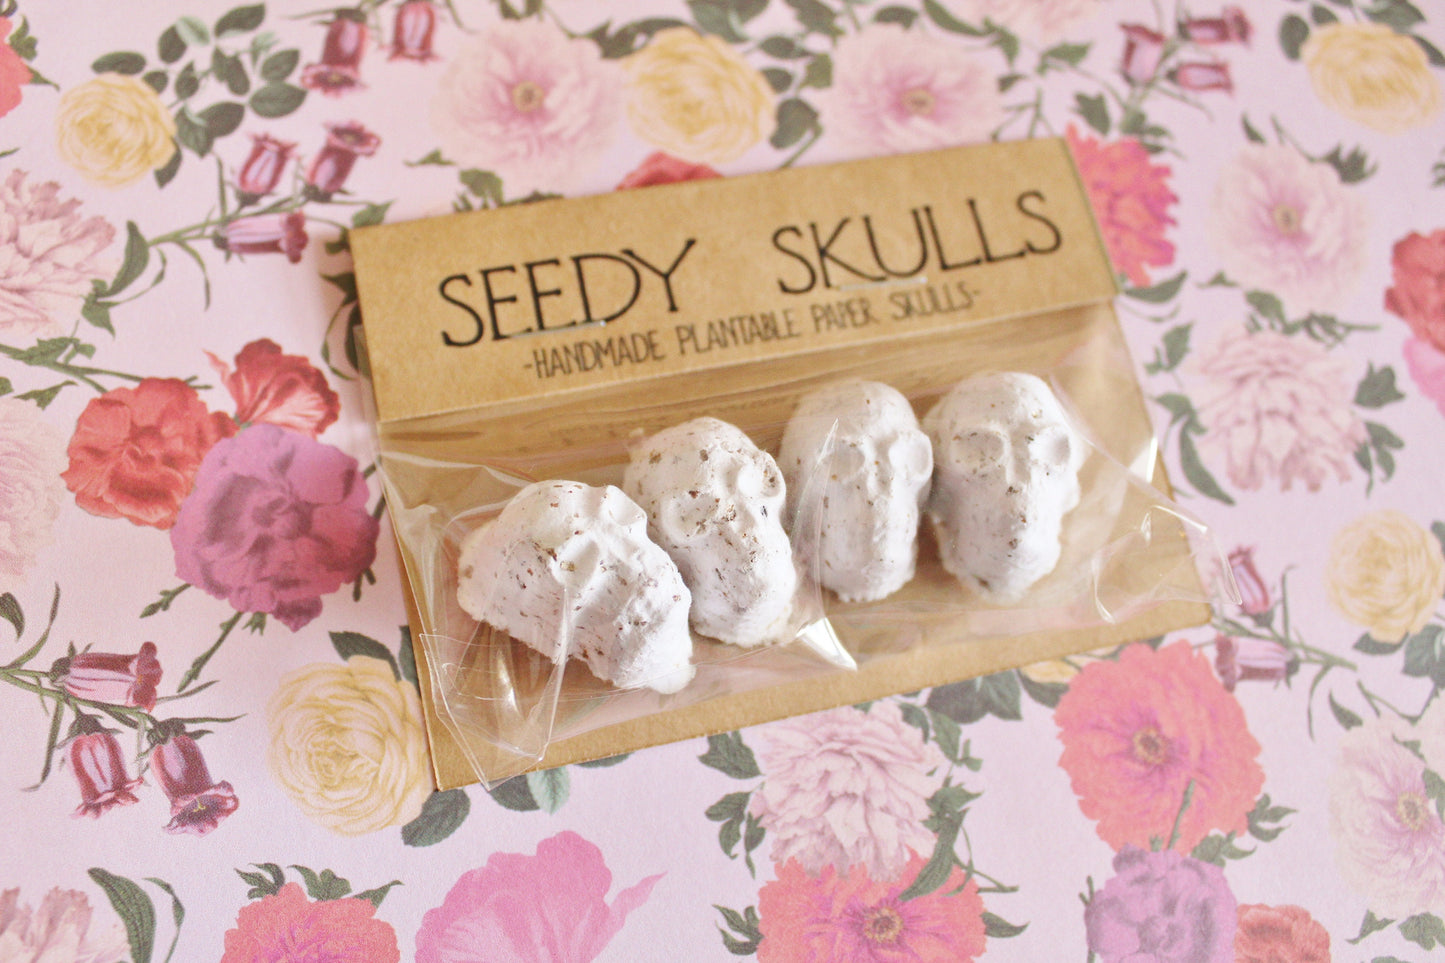 White Plantable Paper Skulls / Seed Bombs / Seedy Skulls Pack / Recycled Paper Pulp Craft / Spring Summer Small Gift / Skull Flowers